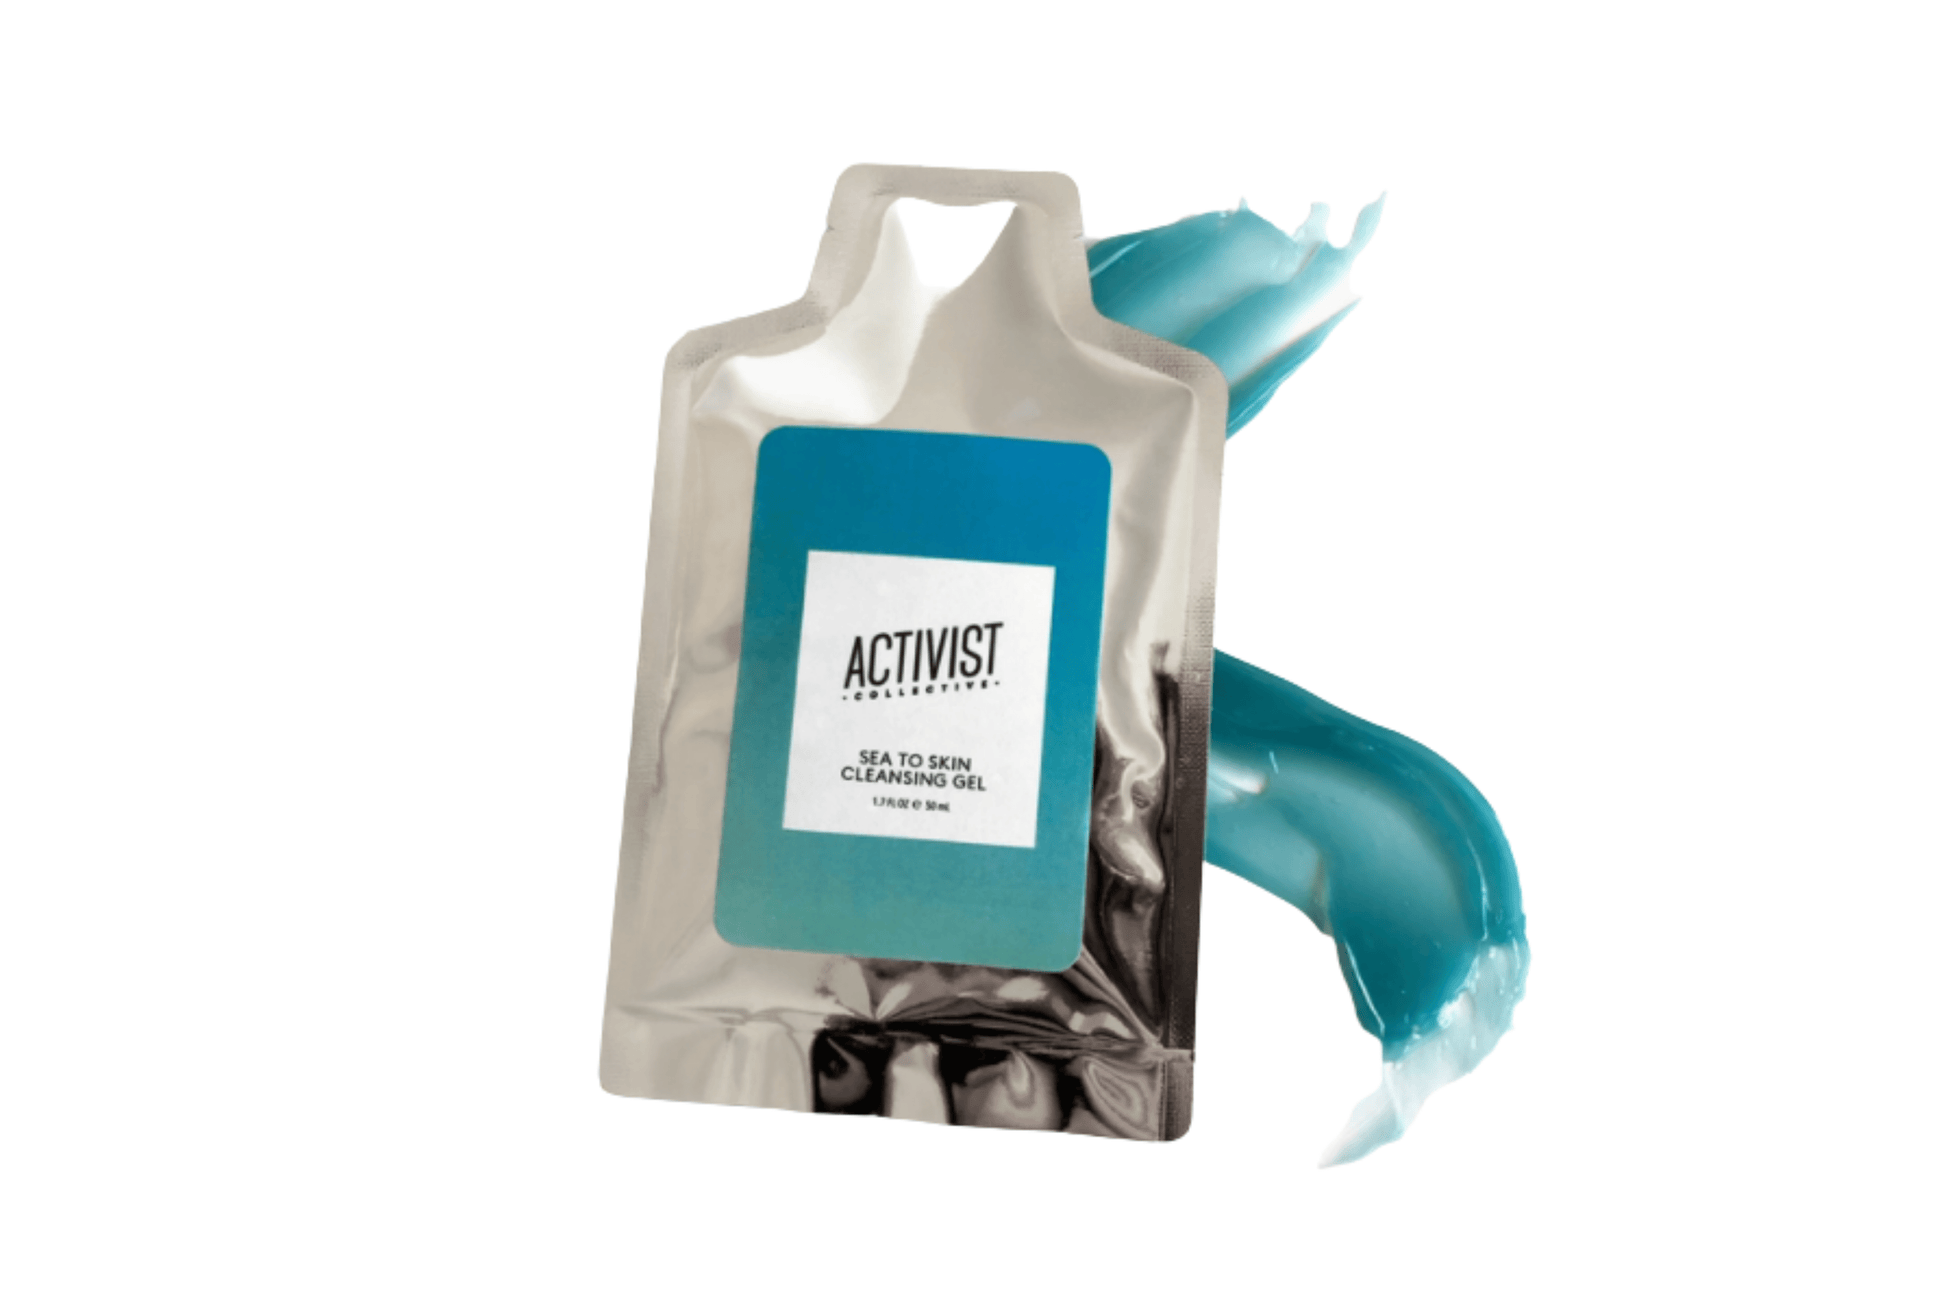 Activist Skincare Refill Pouch Sea to Skin Cleansing Gel